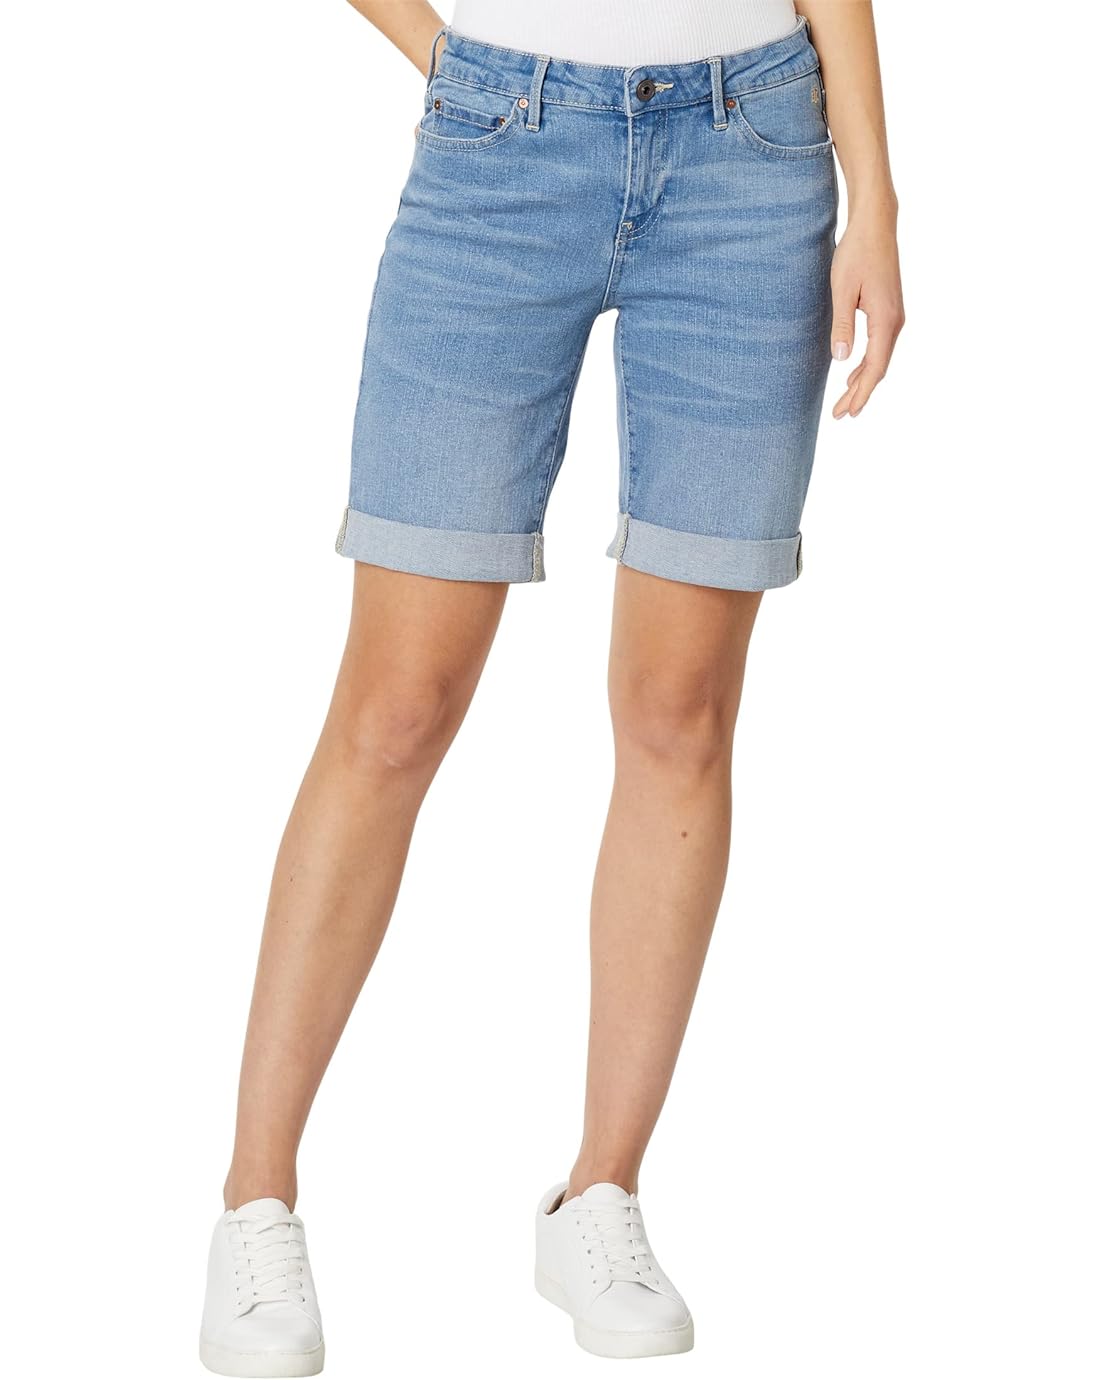 Tommy Hilfiger 9 Denim Shorts in Pacific Blue